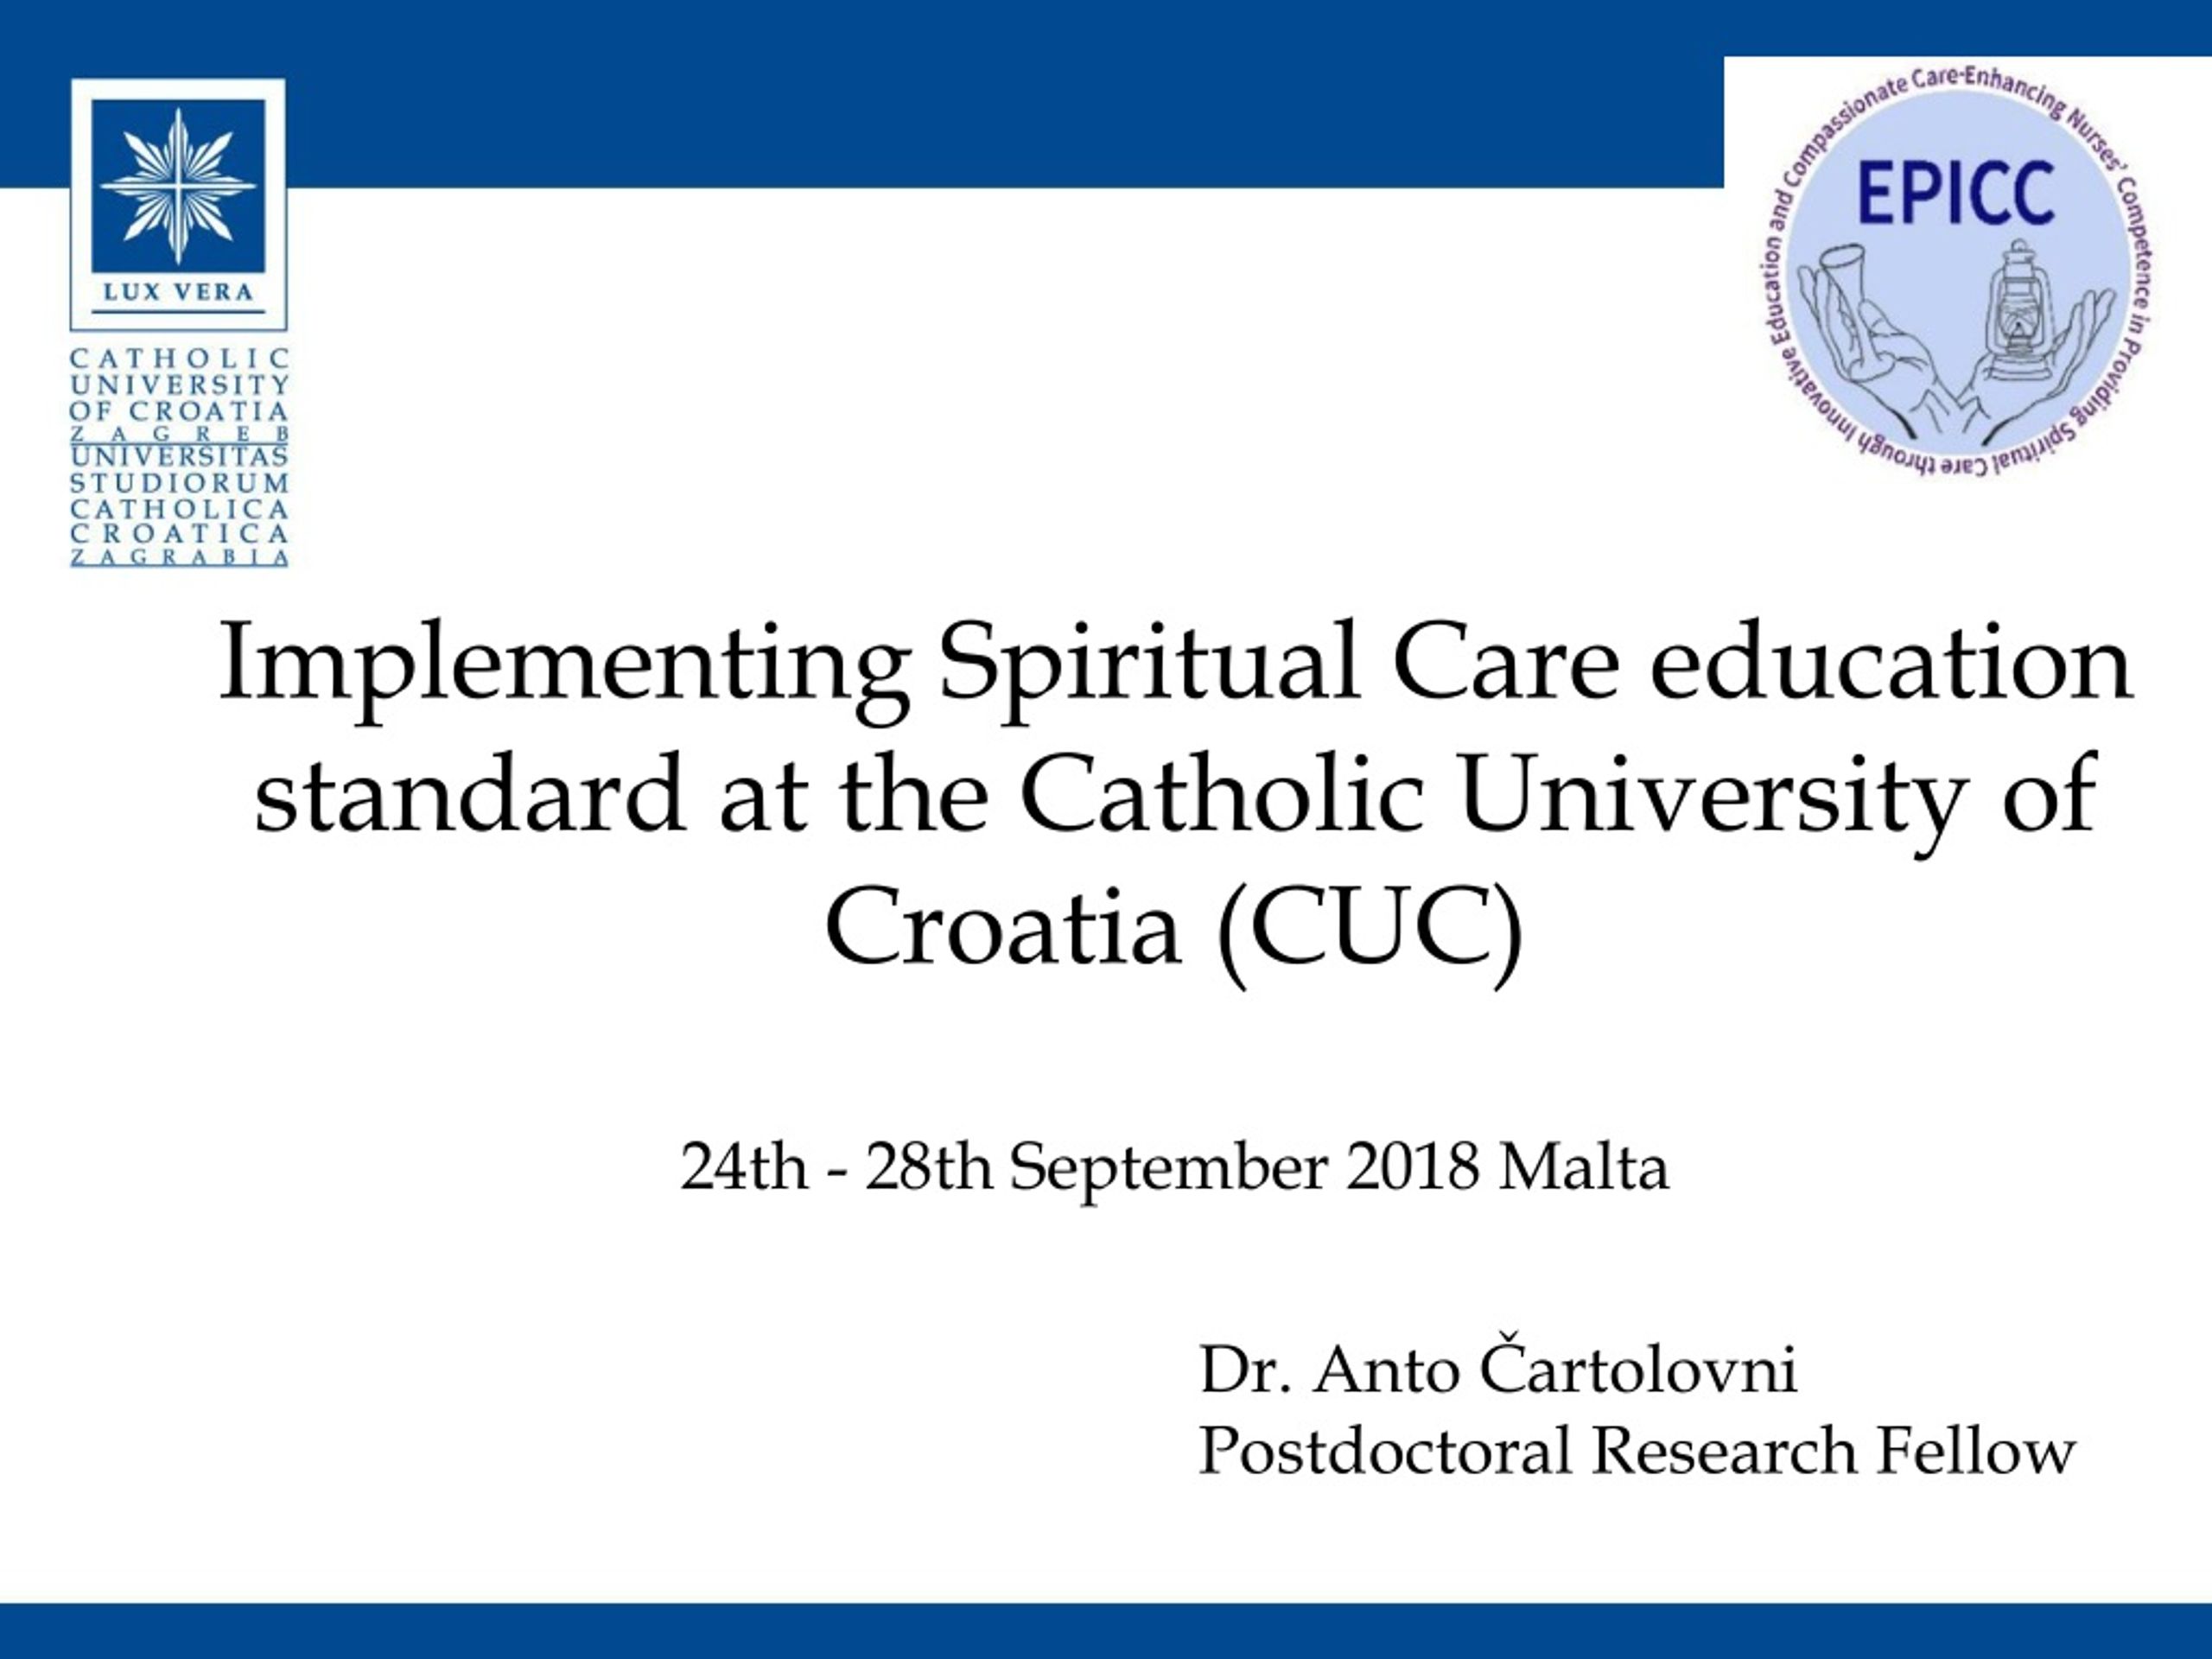 Ppt Implementing Spiritual Care Education Standard At The Catholic University Of Croatia Cuc 6176